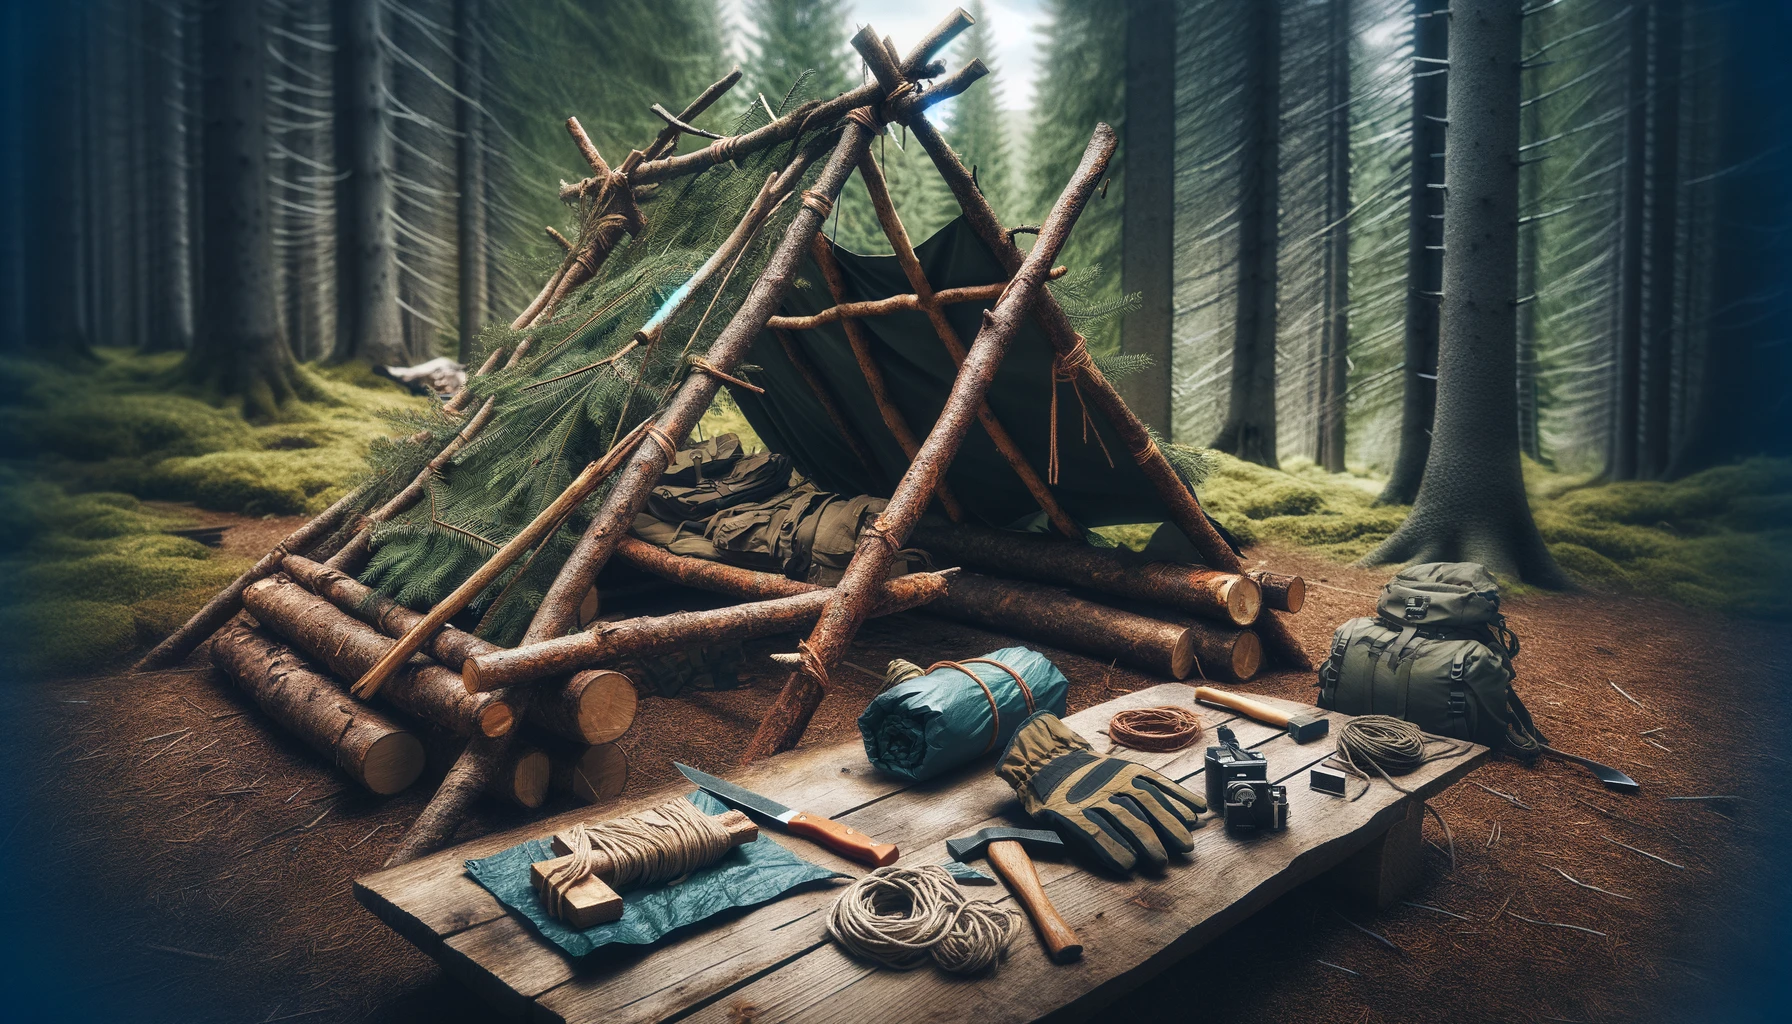 A highly detailed and realistic image demonstrating the construction of an A-Frame survival shelter in a dense forest, featuring natural materials like branches and leaves, with survival gear such as a waterproof tarp, rope, and essential tools like an axe and a knife. The setting and composition are designed to appeal to preppers, highlighting the importance of skill and preparedness in wilderness survival scenarios.